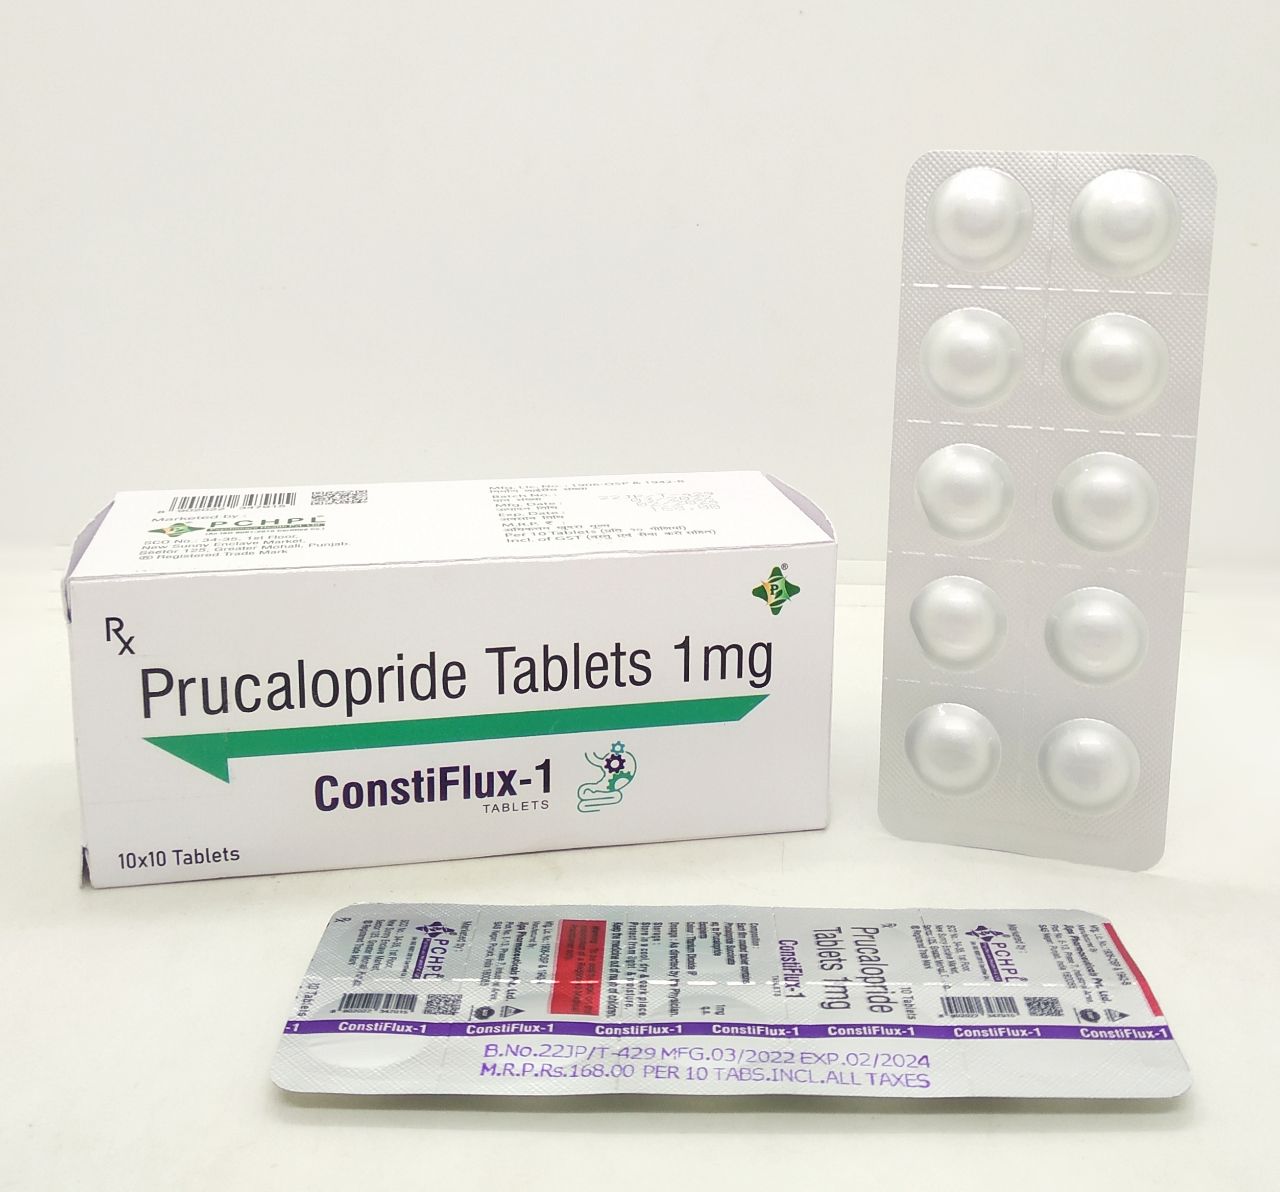 Prucalopride Tablests 1 mg